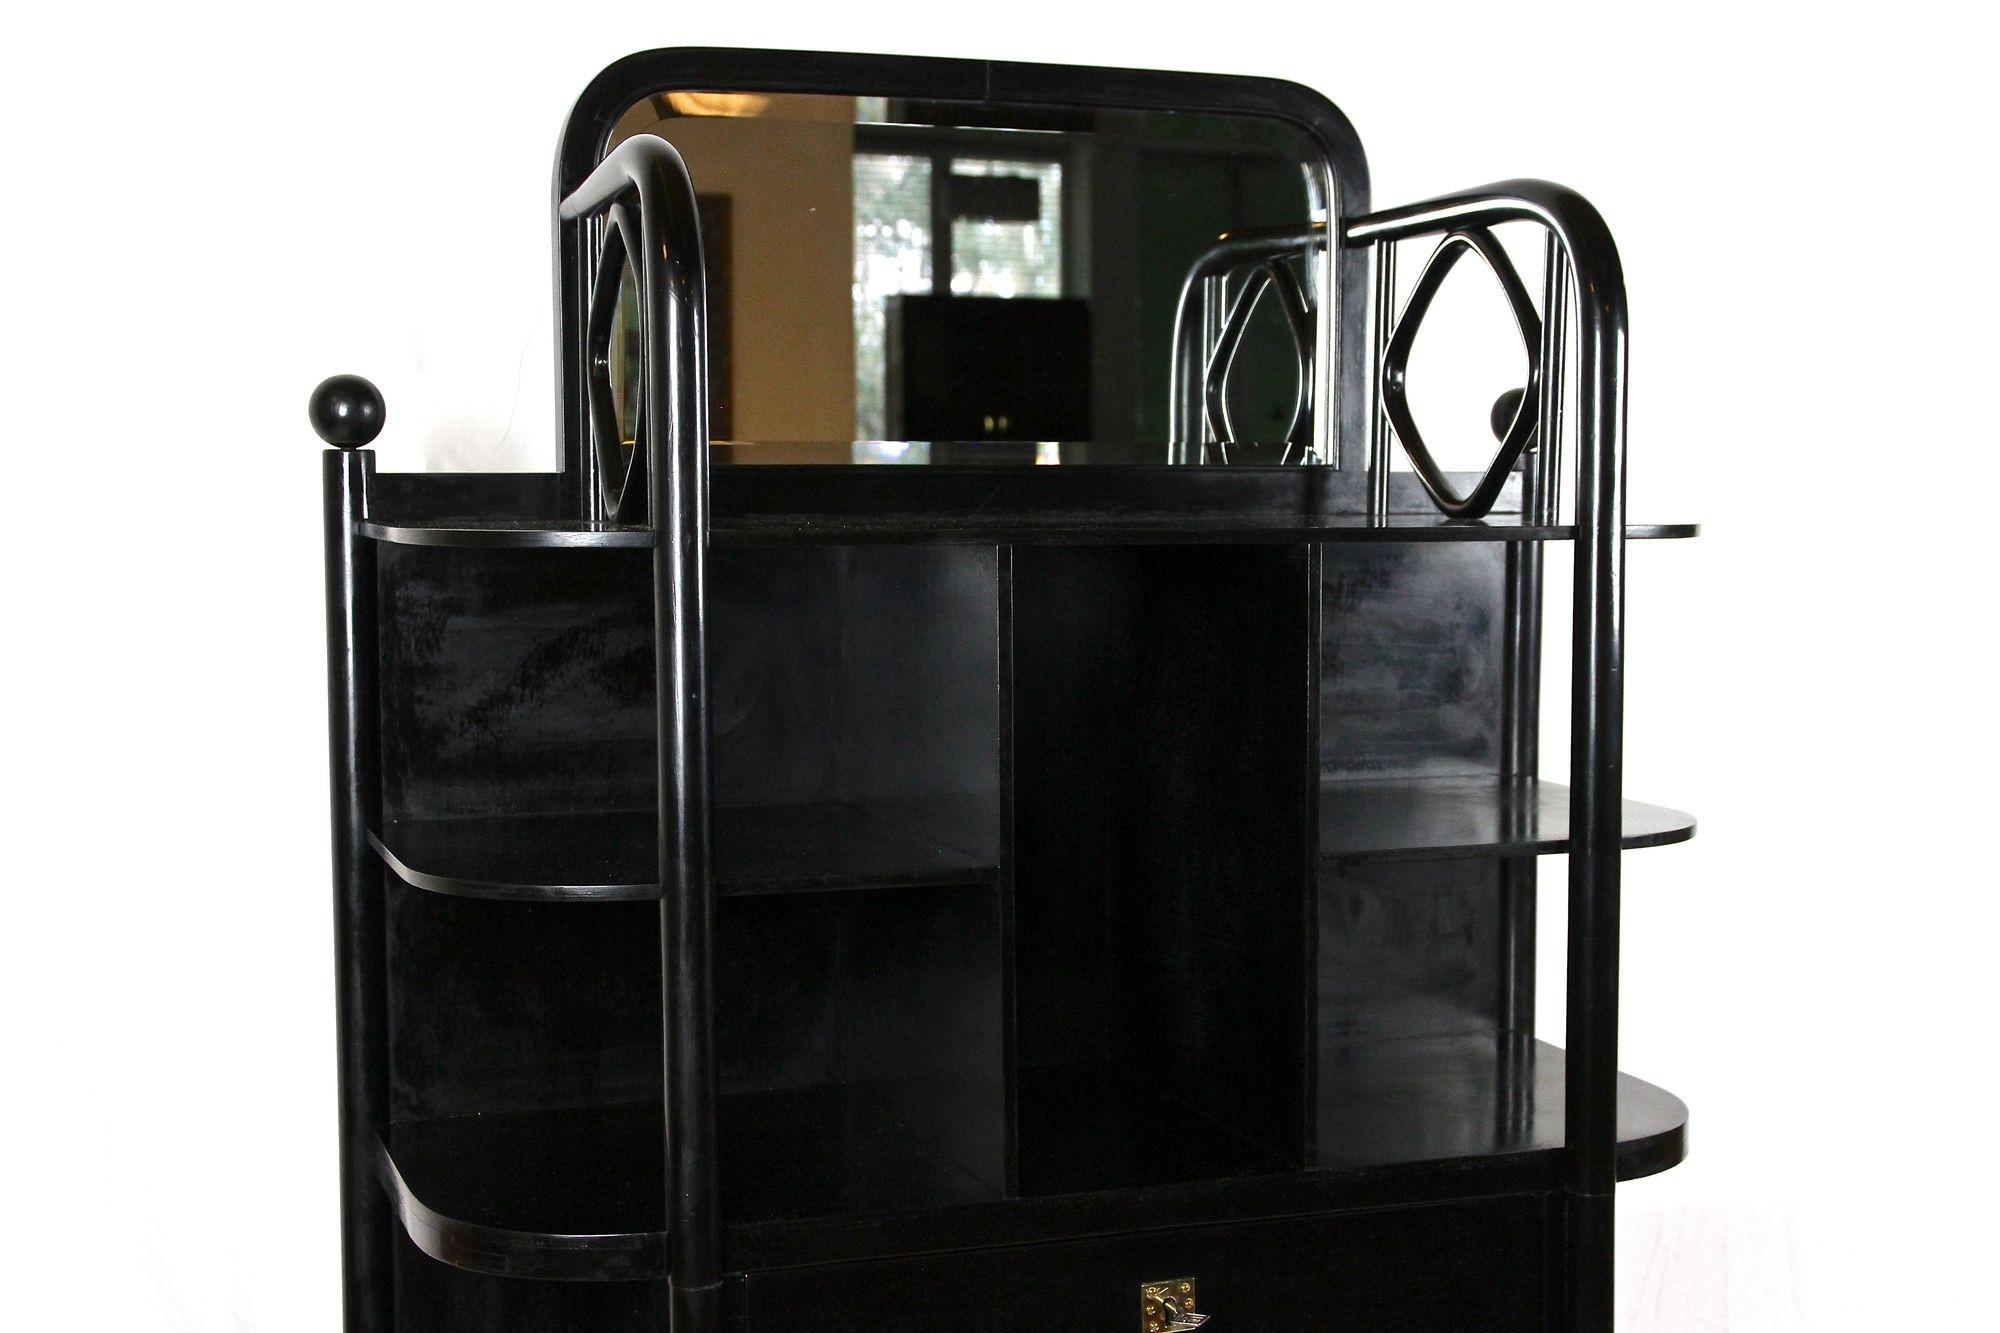 Austrian Black Art Nouveau Display Cabinet by Josef Hoffmann for Thonet, AT ca. 1905 For Sale